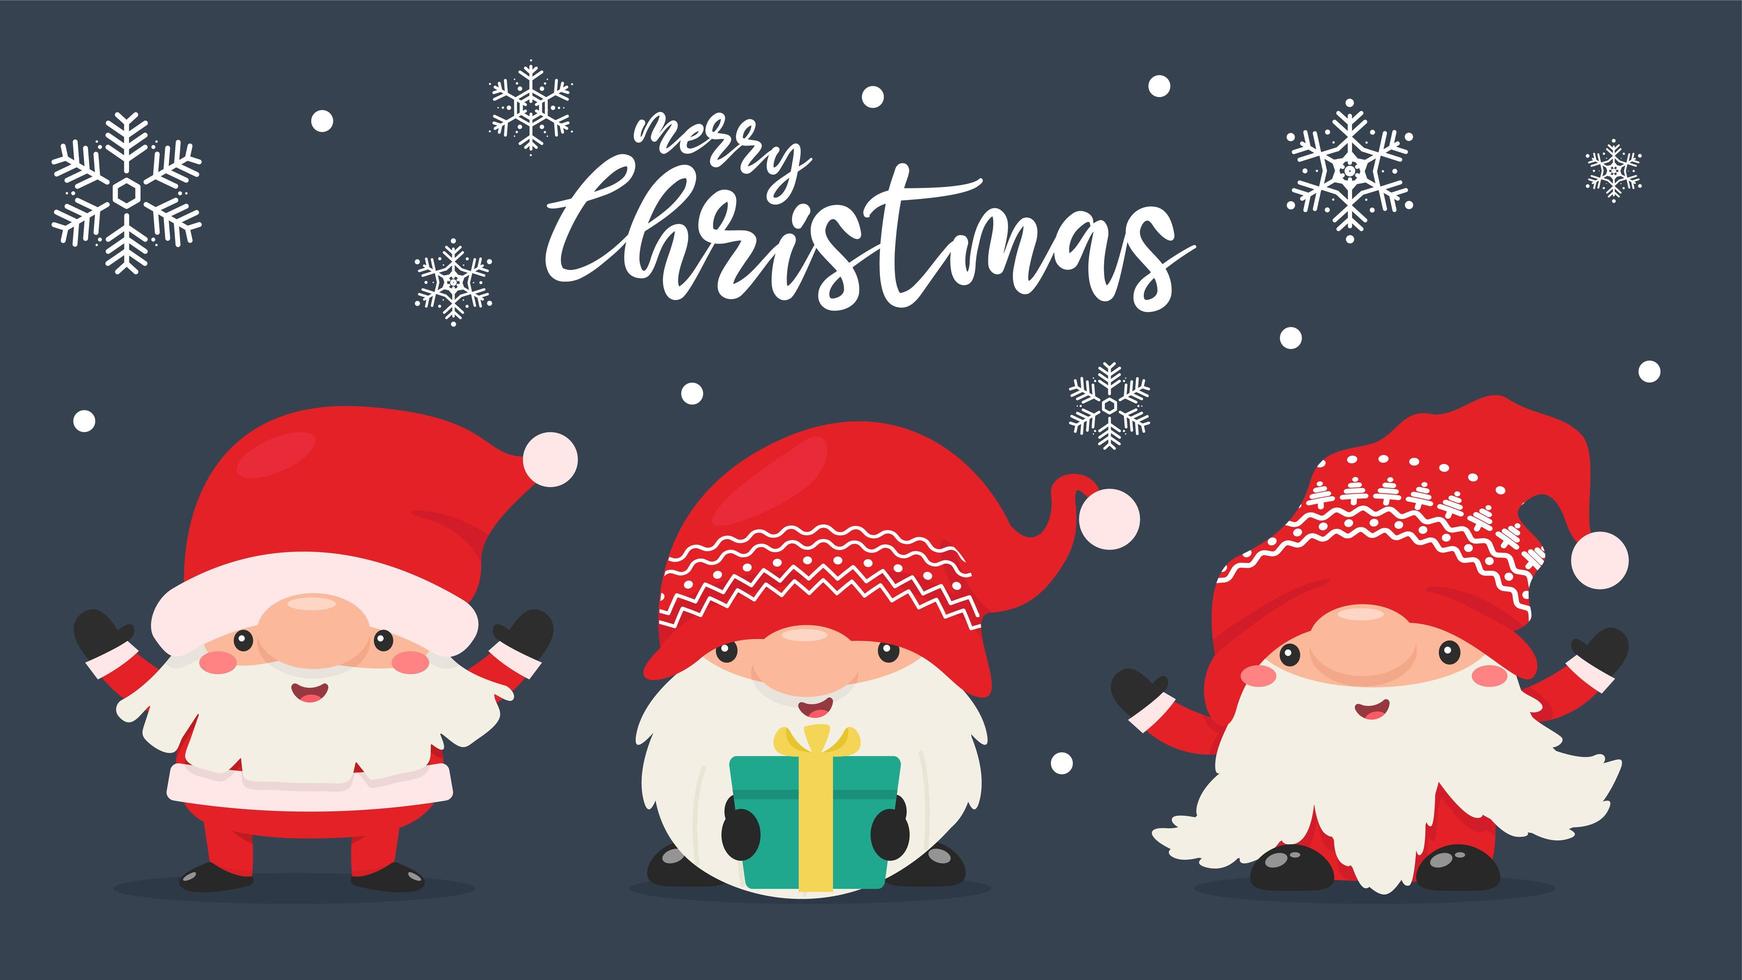 Dwarf gnomes in Santa outfits with snowflakes vector